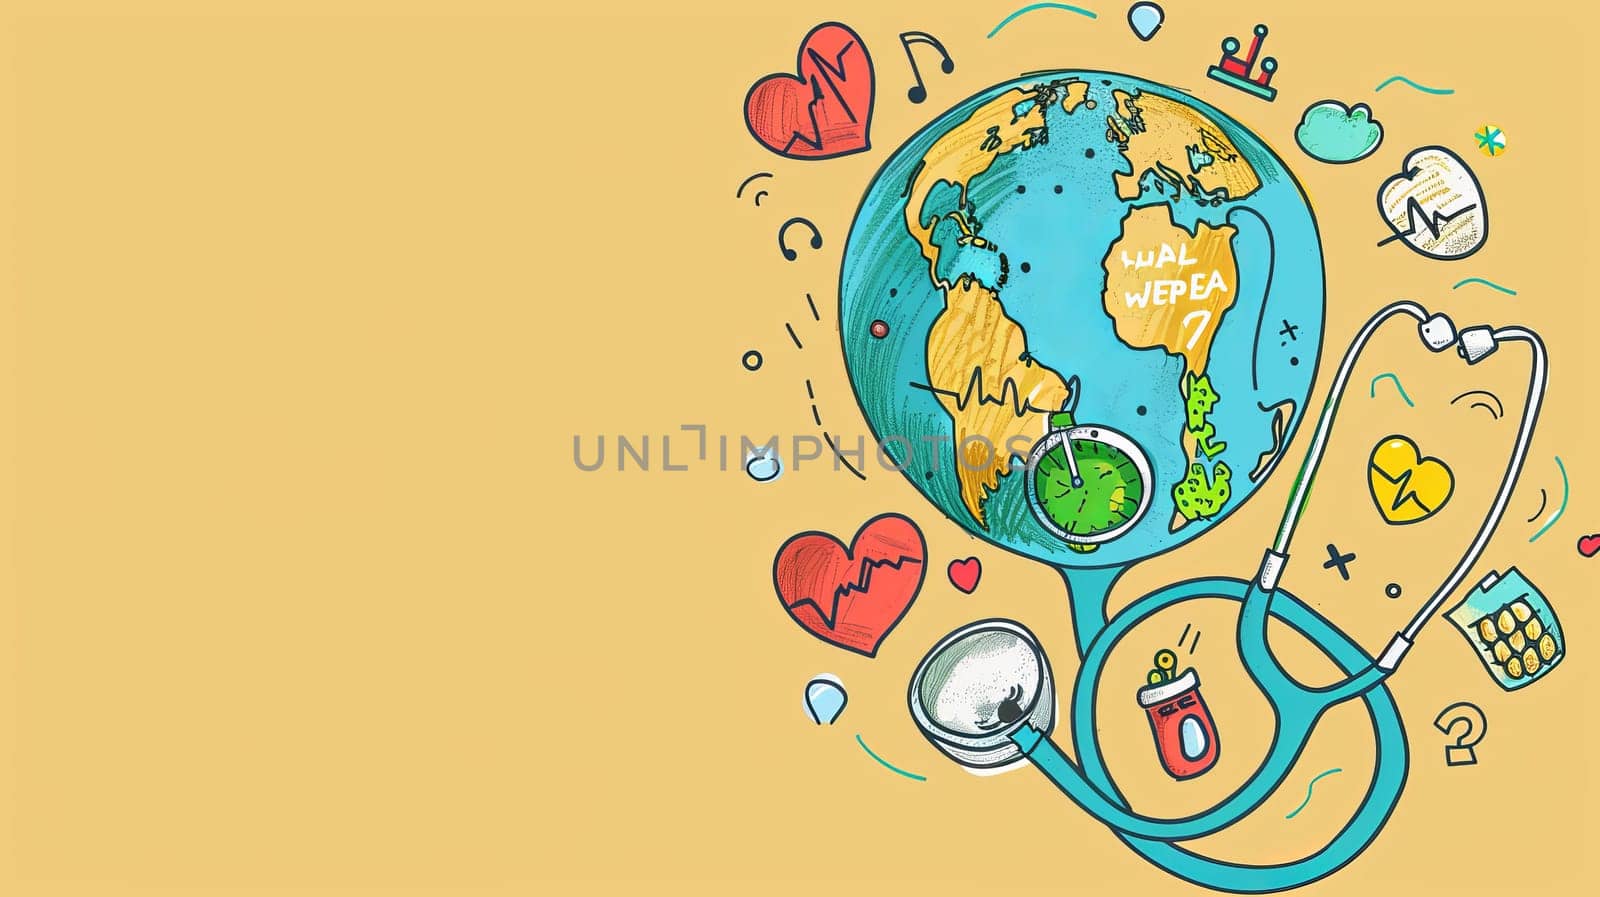 An earth, heart, stethoscope, hand drawn comic doodle concept for World Health Day. Use in web, banner, campaign, social media posts.